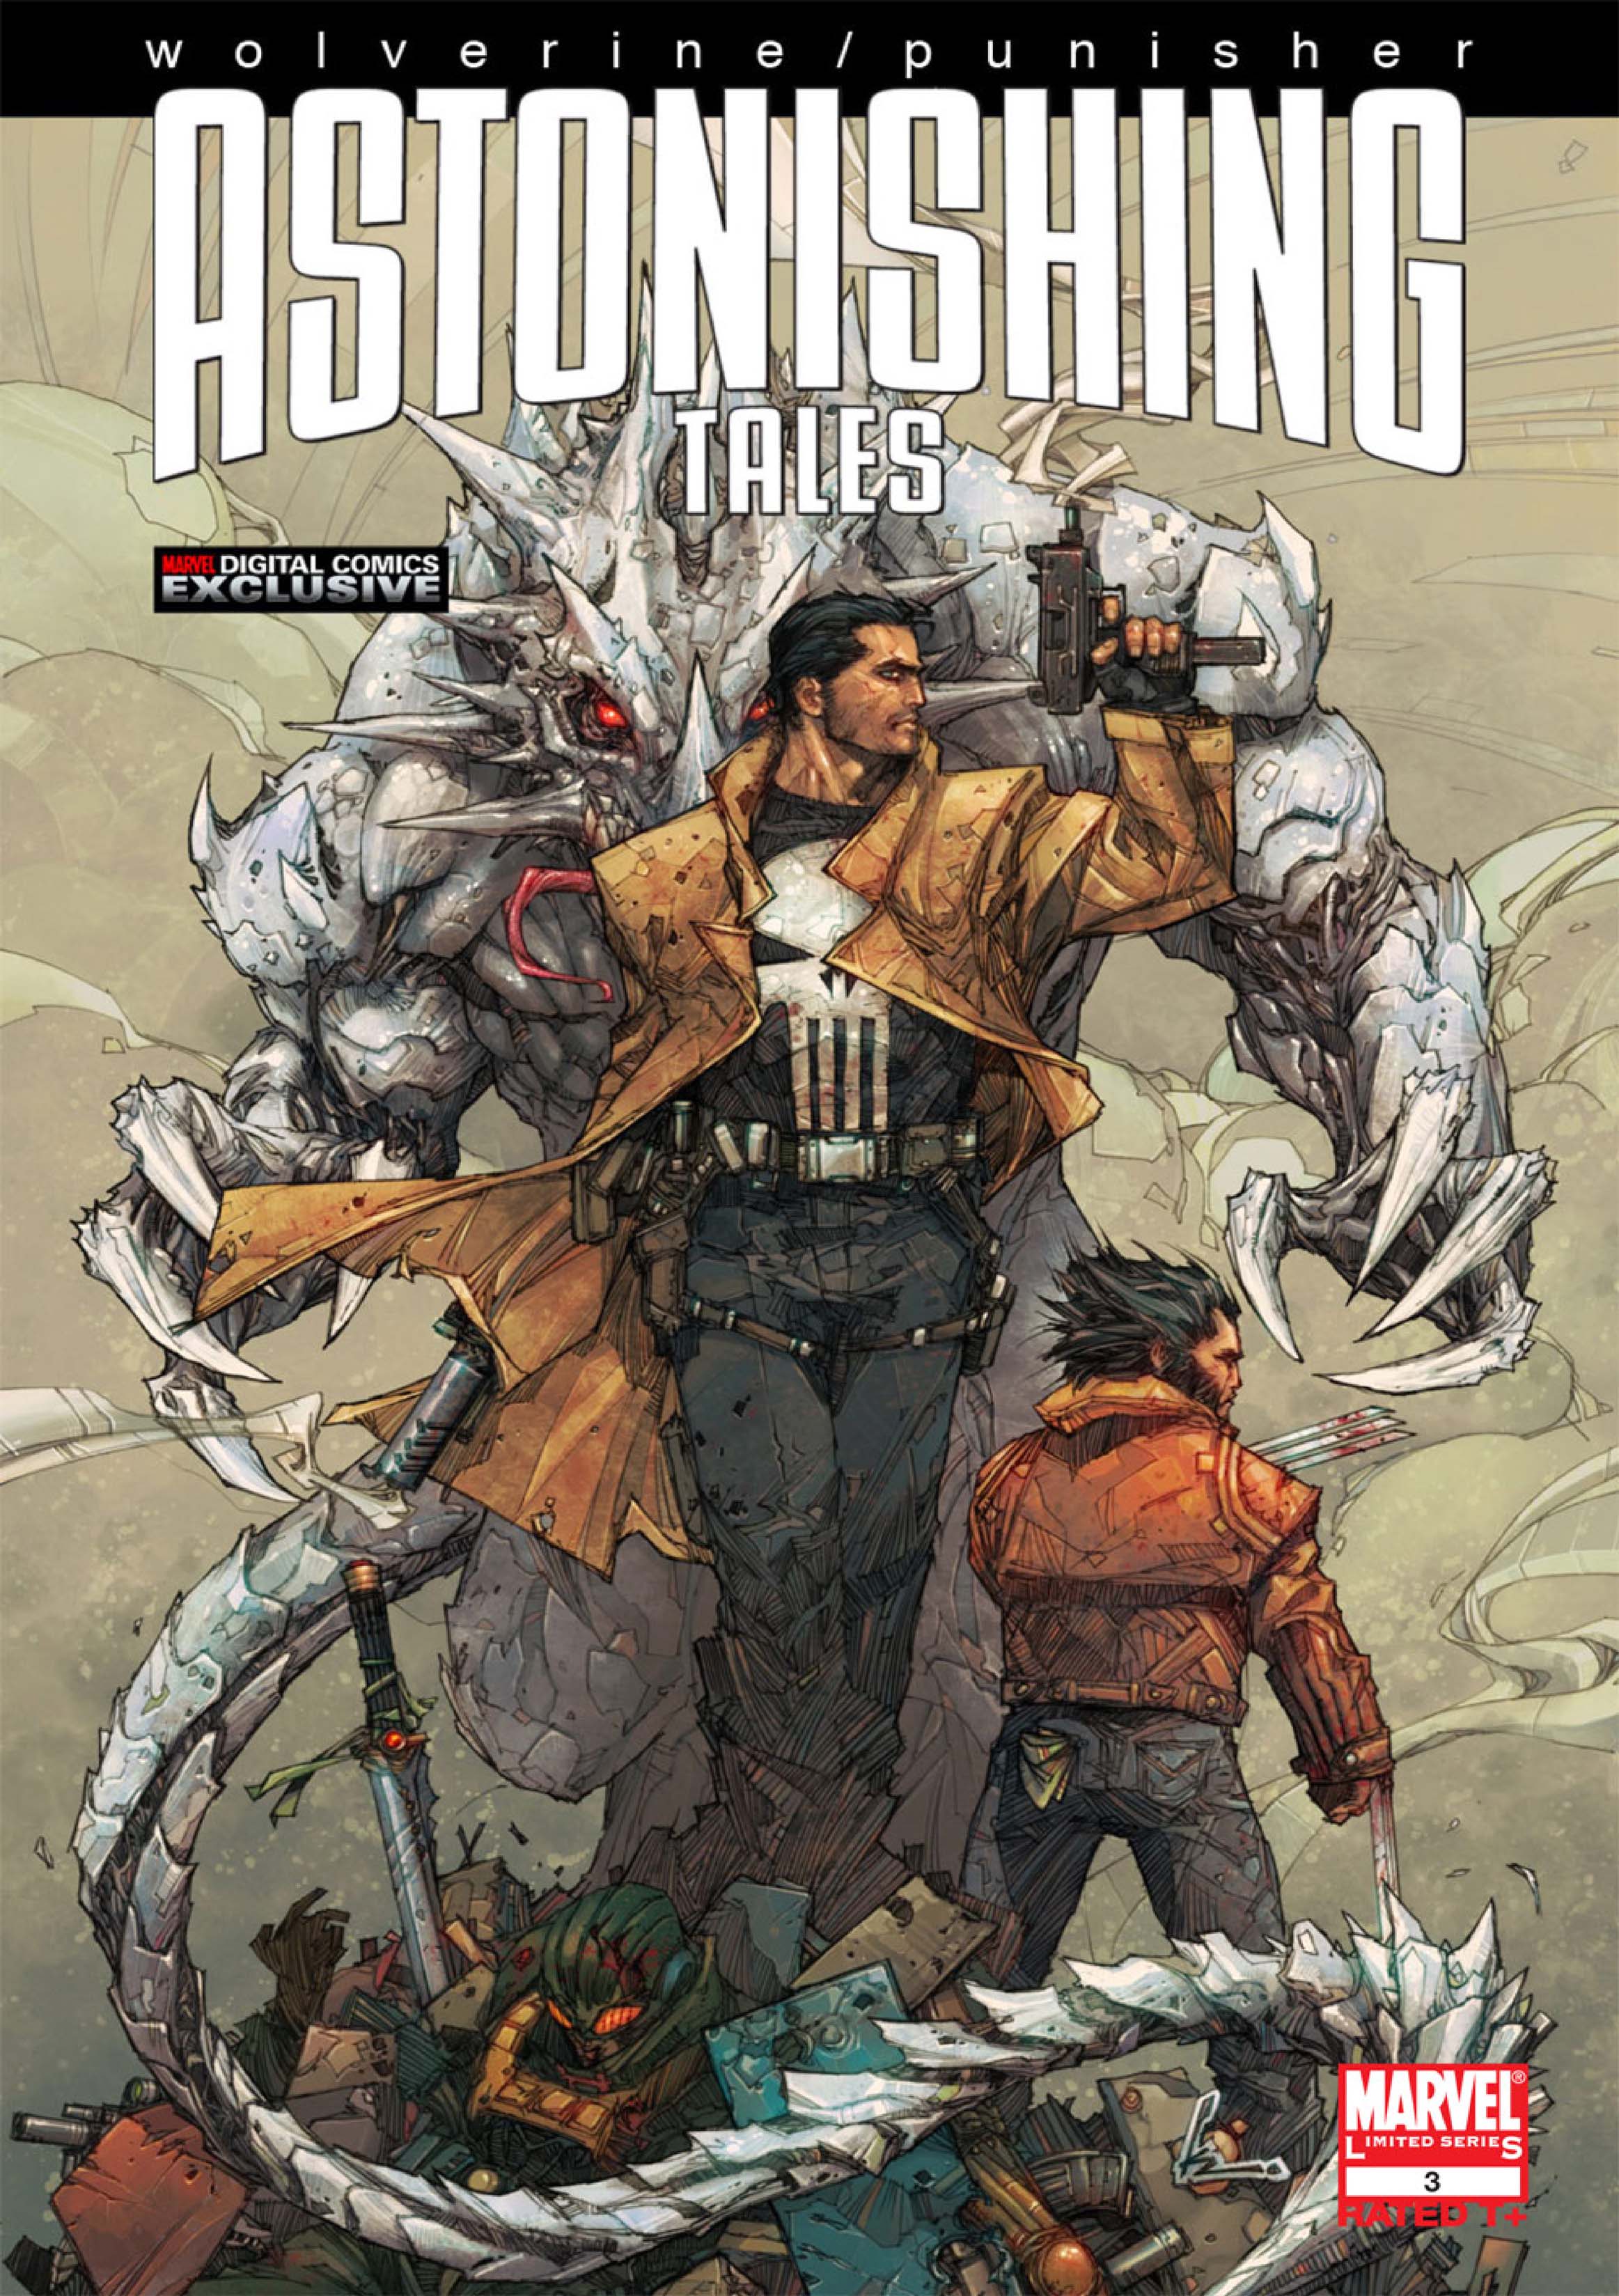 Read online Astonishing Tales: Wolverine/Punisher comic -  Issue #3 - 1